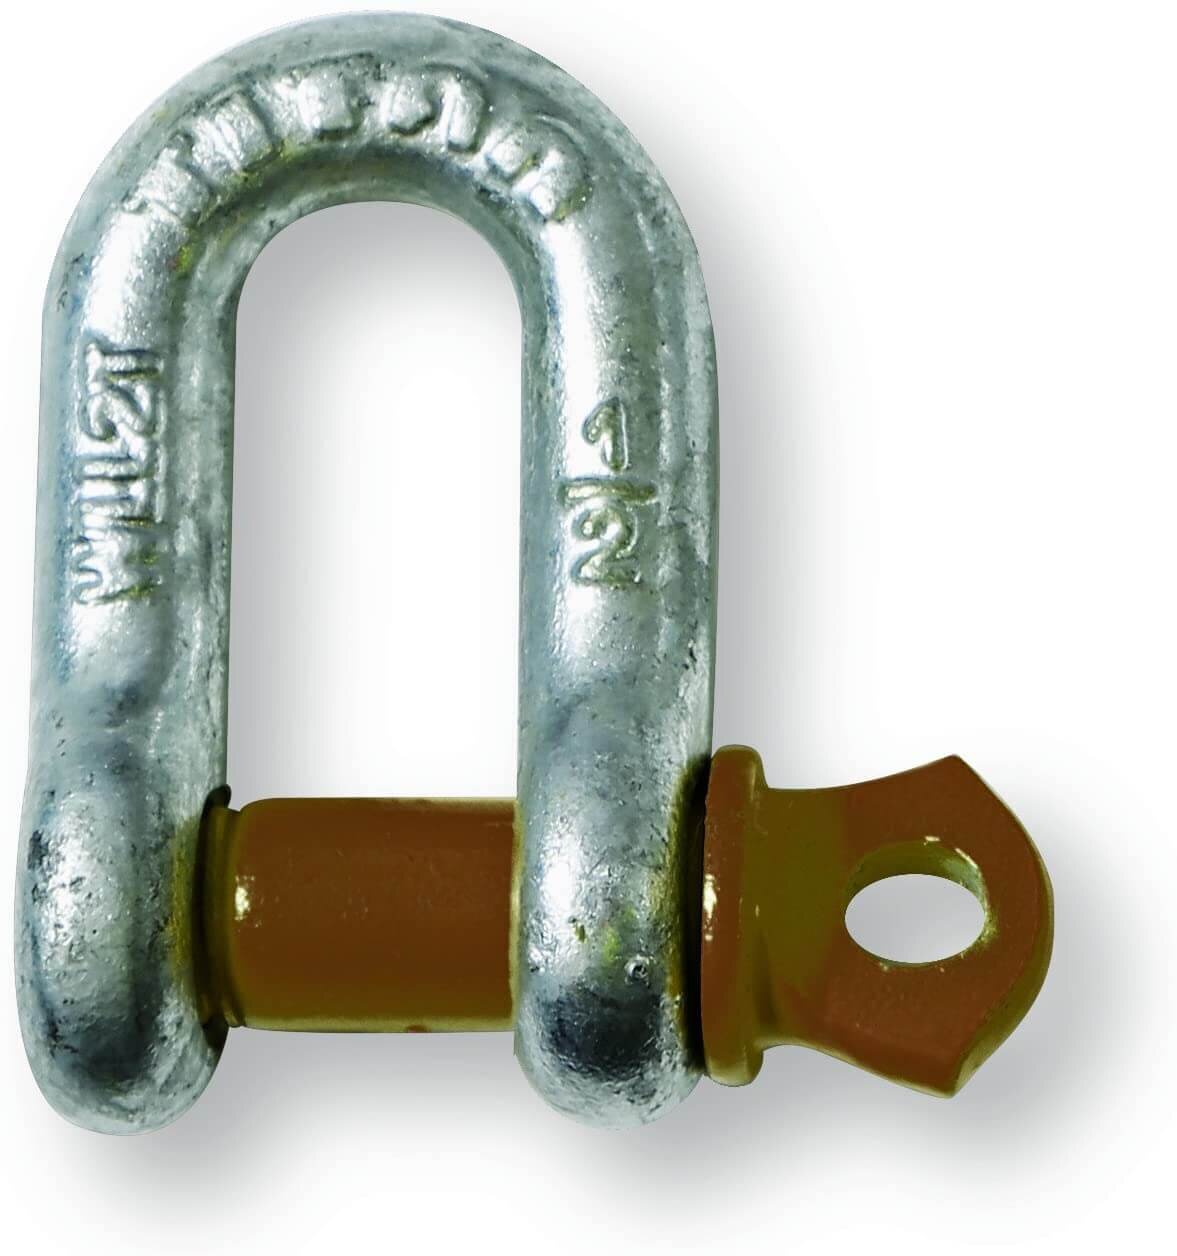 D-Ring Shackle